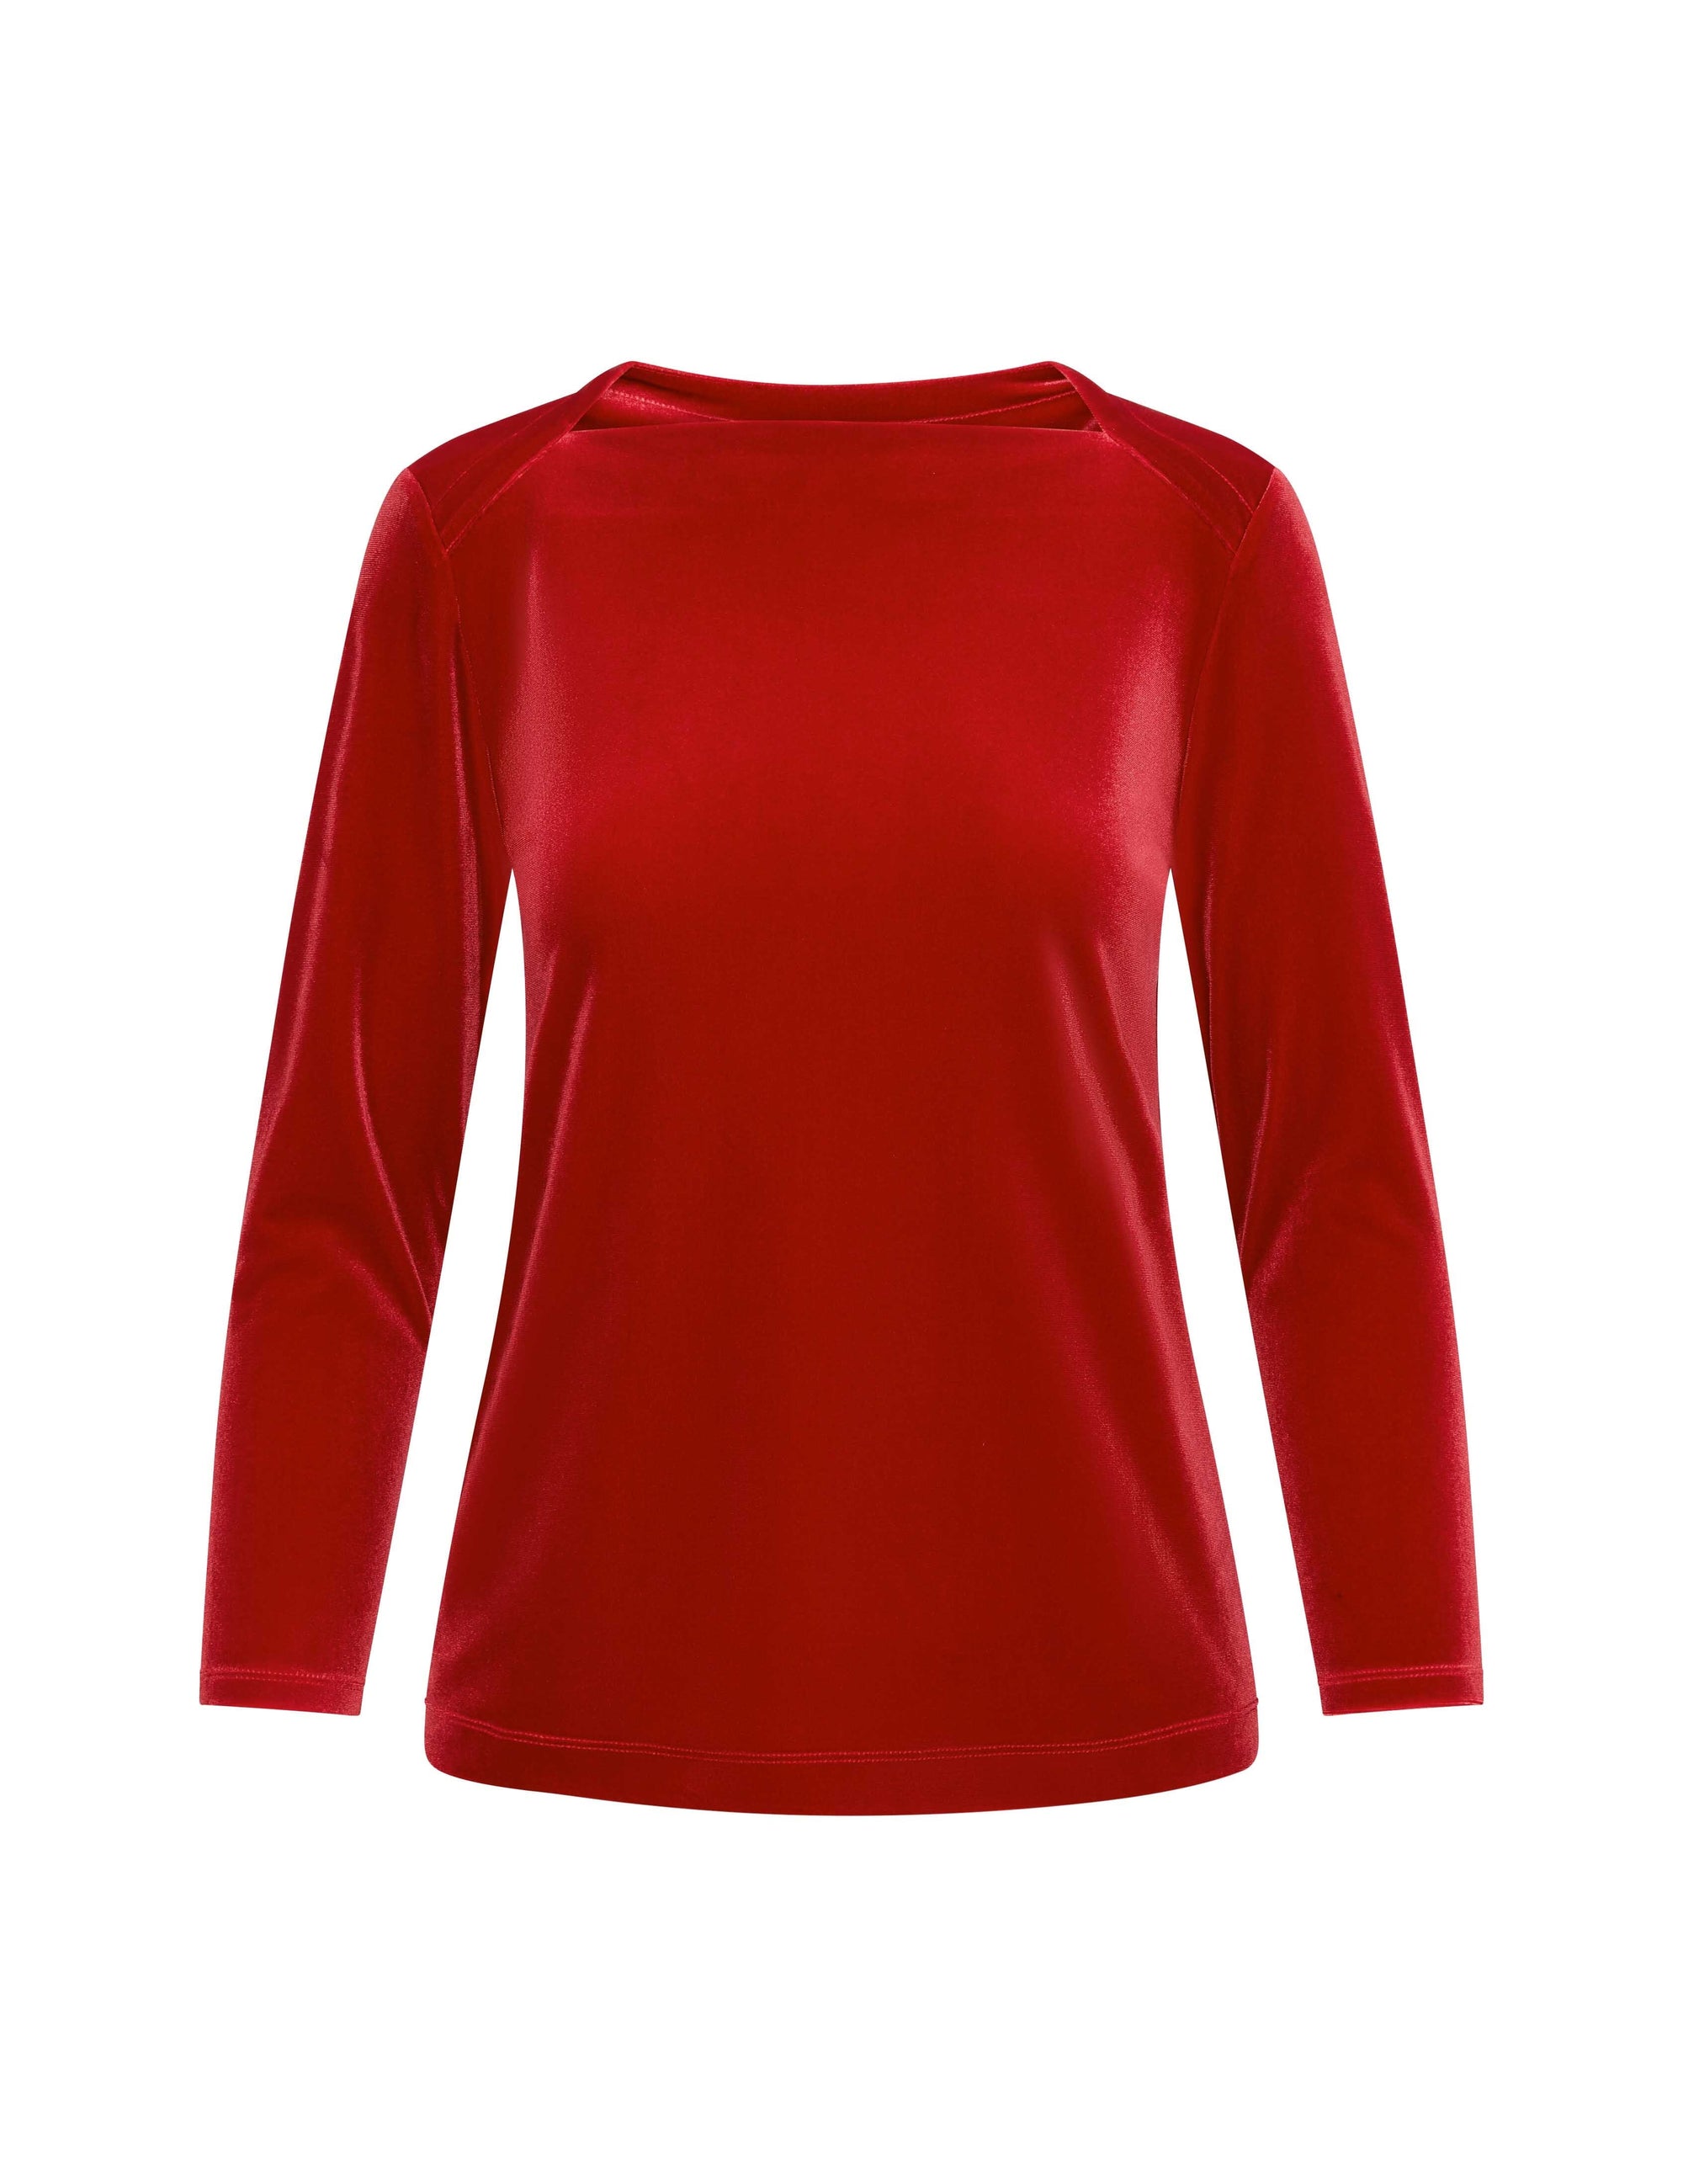 Anne Klein Titian Red Velour Envelope Top- Clearance